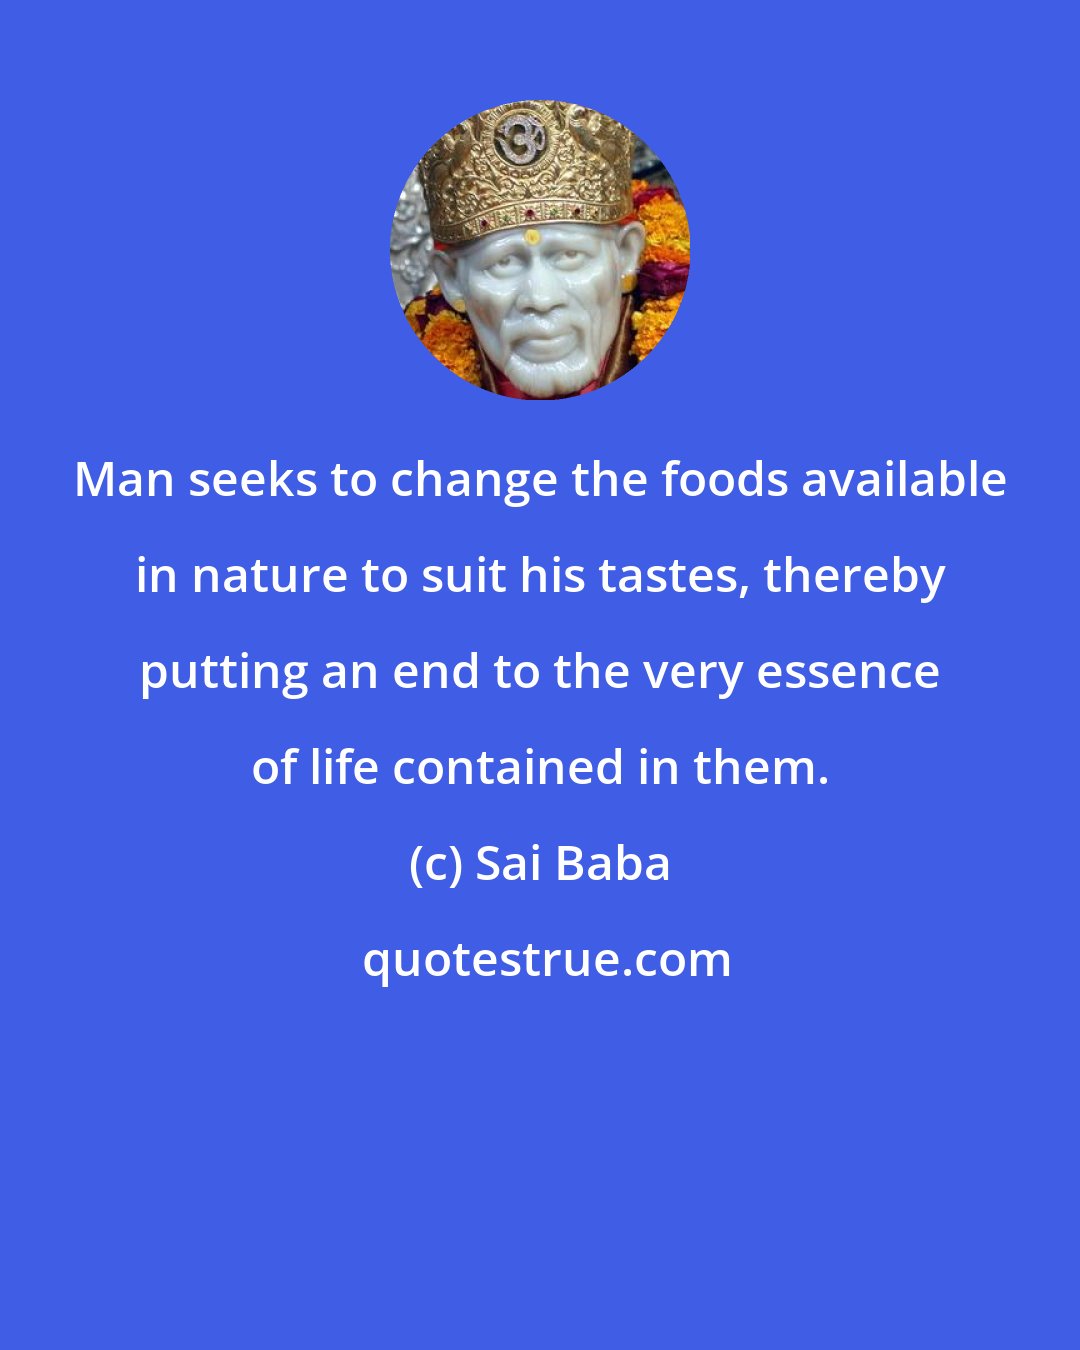 Sai Baba: Man seeks to change the foods available in nature to suit his tastes, thereby putting an end to the very essence of life contained in them.